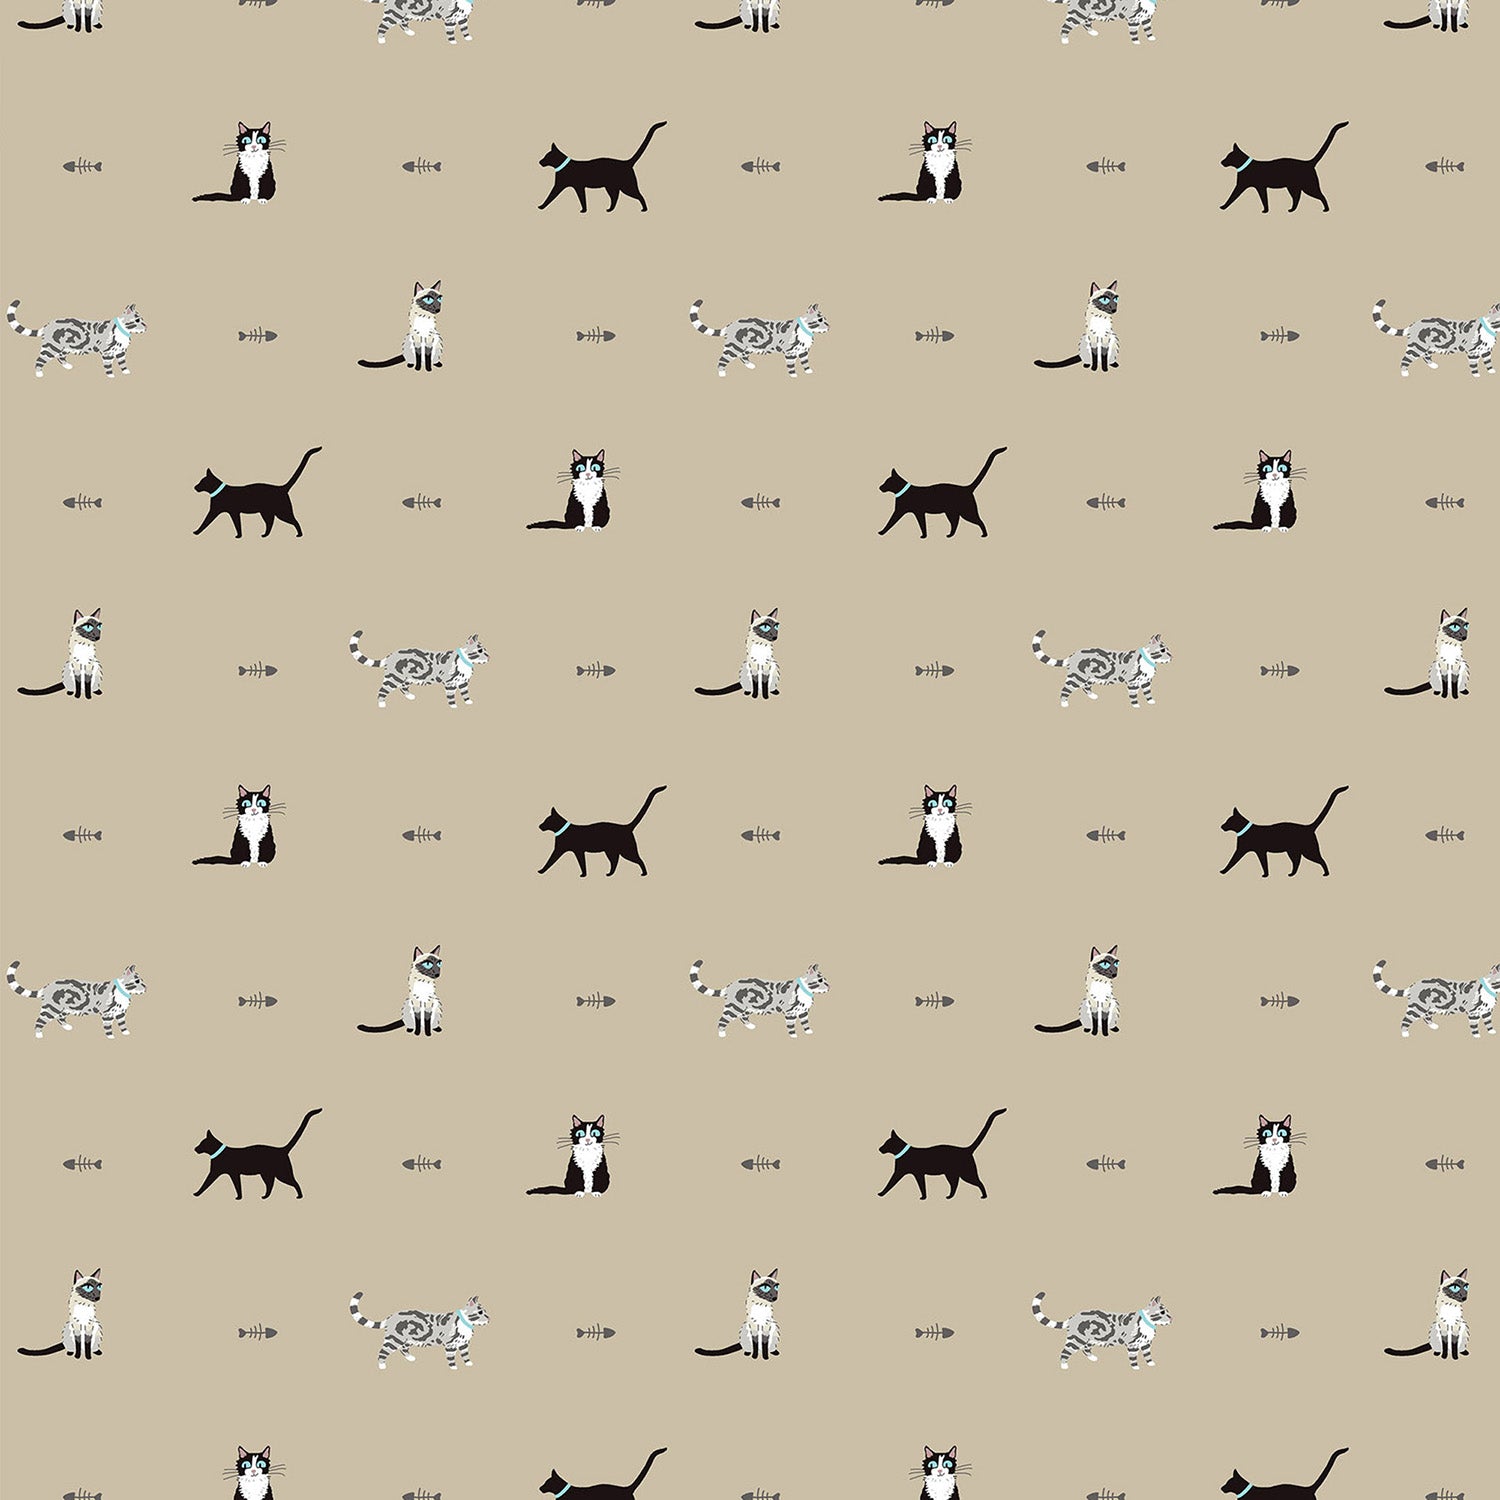 Purrfect Neutral Made to Measure Curtains